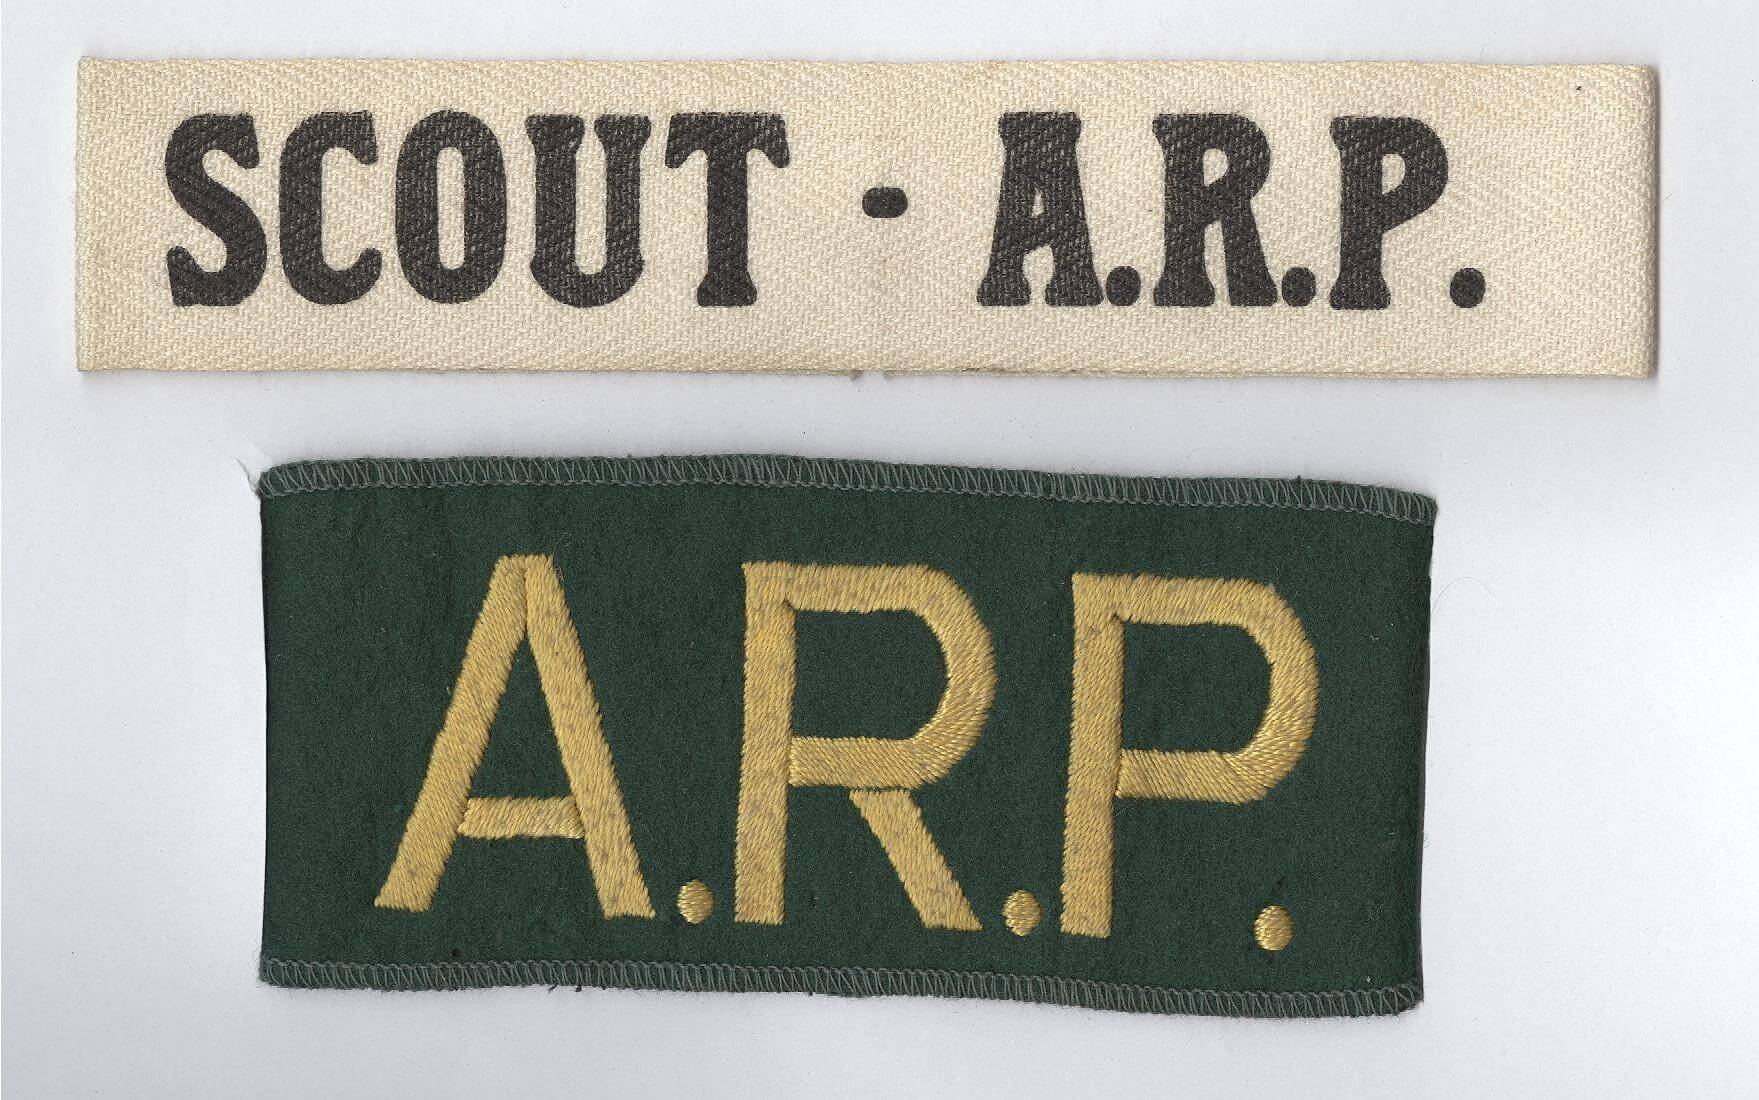 The armbands. The top one is cream with 'SCOUT - A.R.P.' written on it. The bottom one is green and wider, with 'A.R.P.' written in yellow stitching.